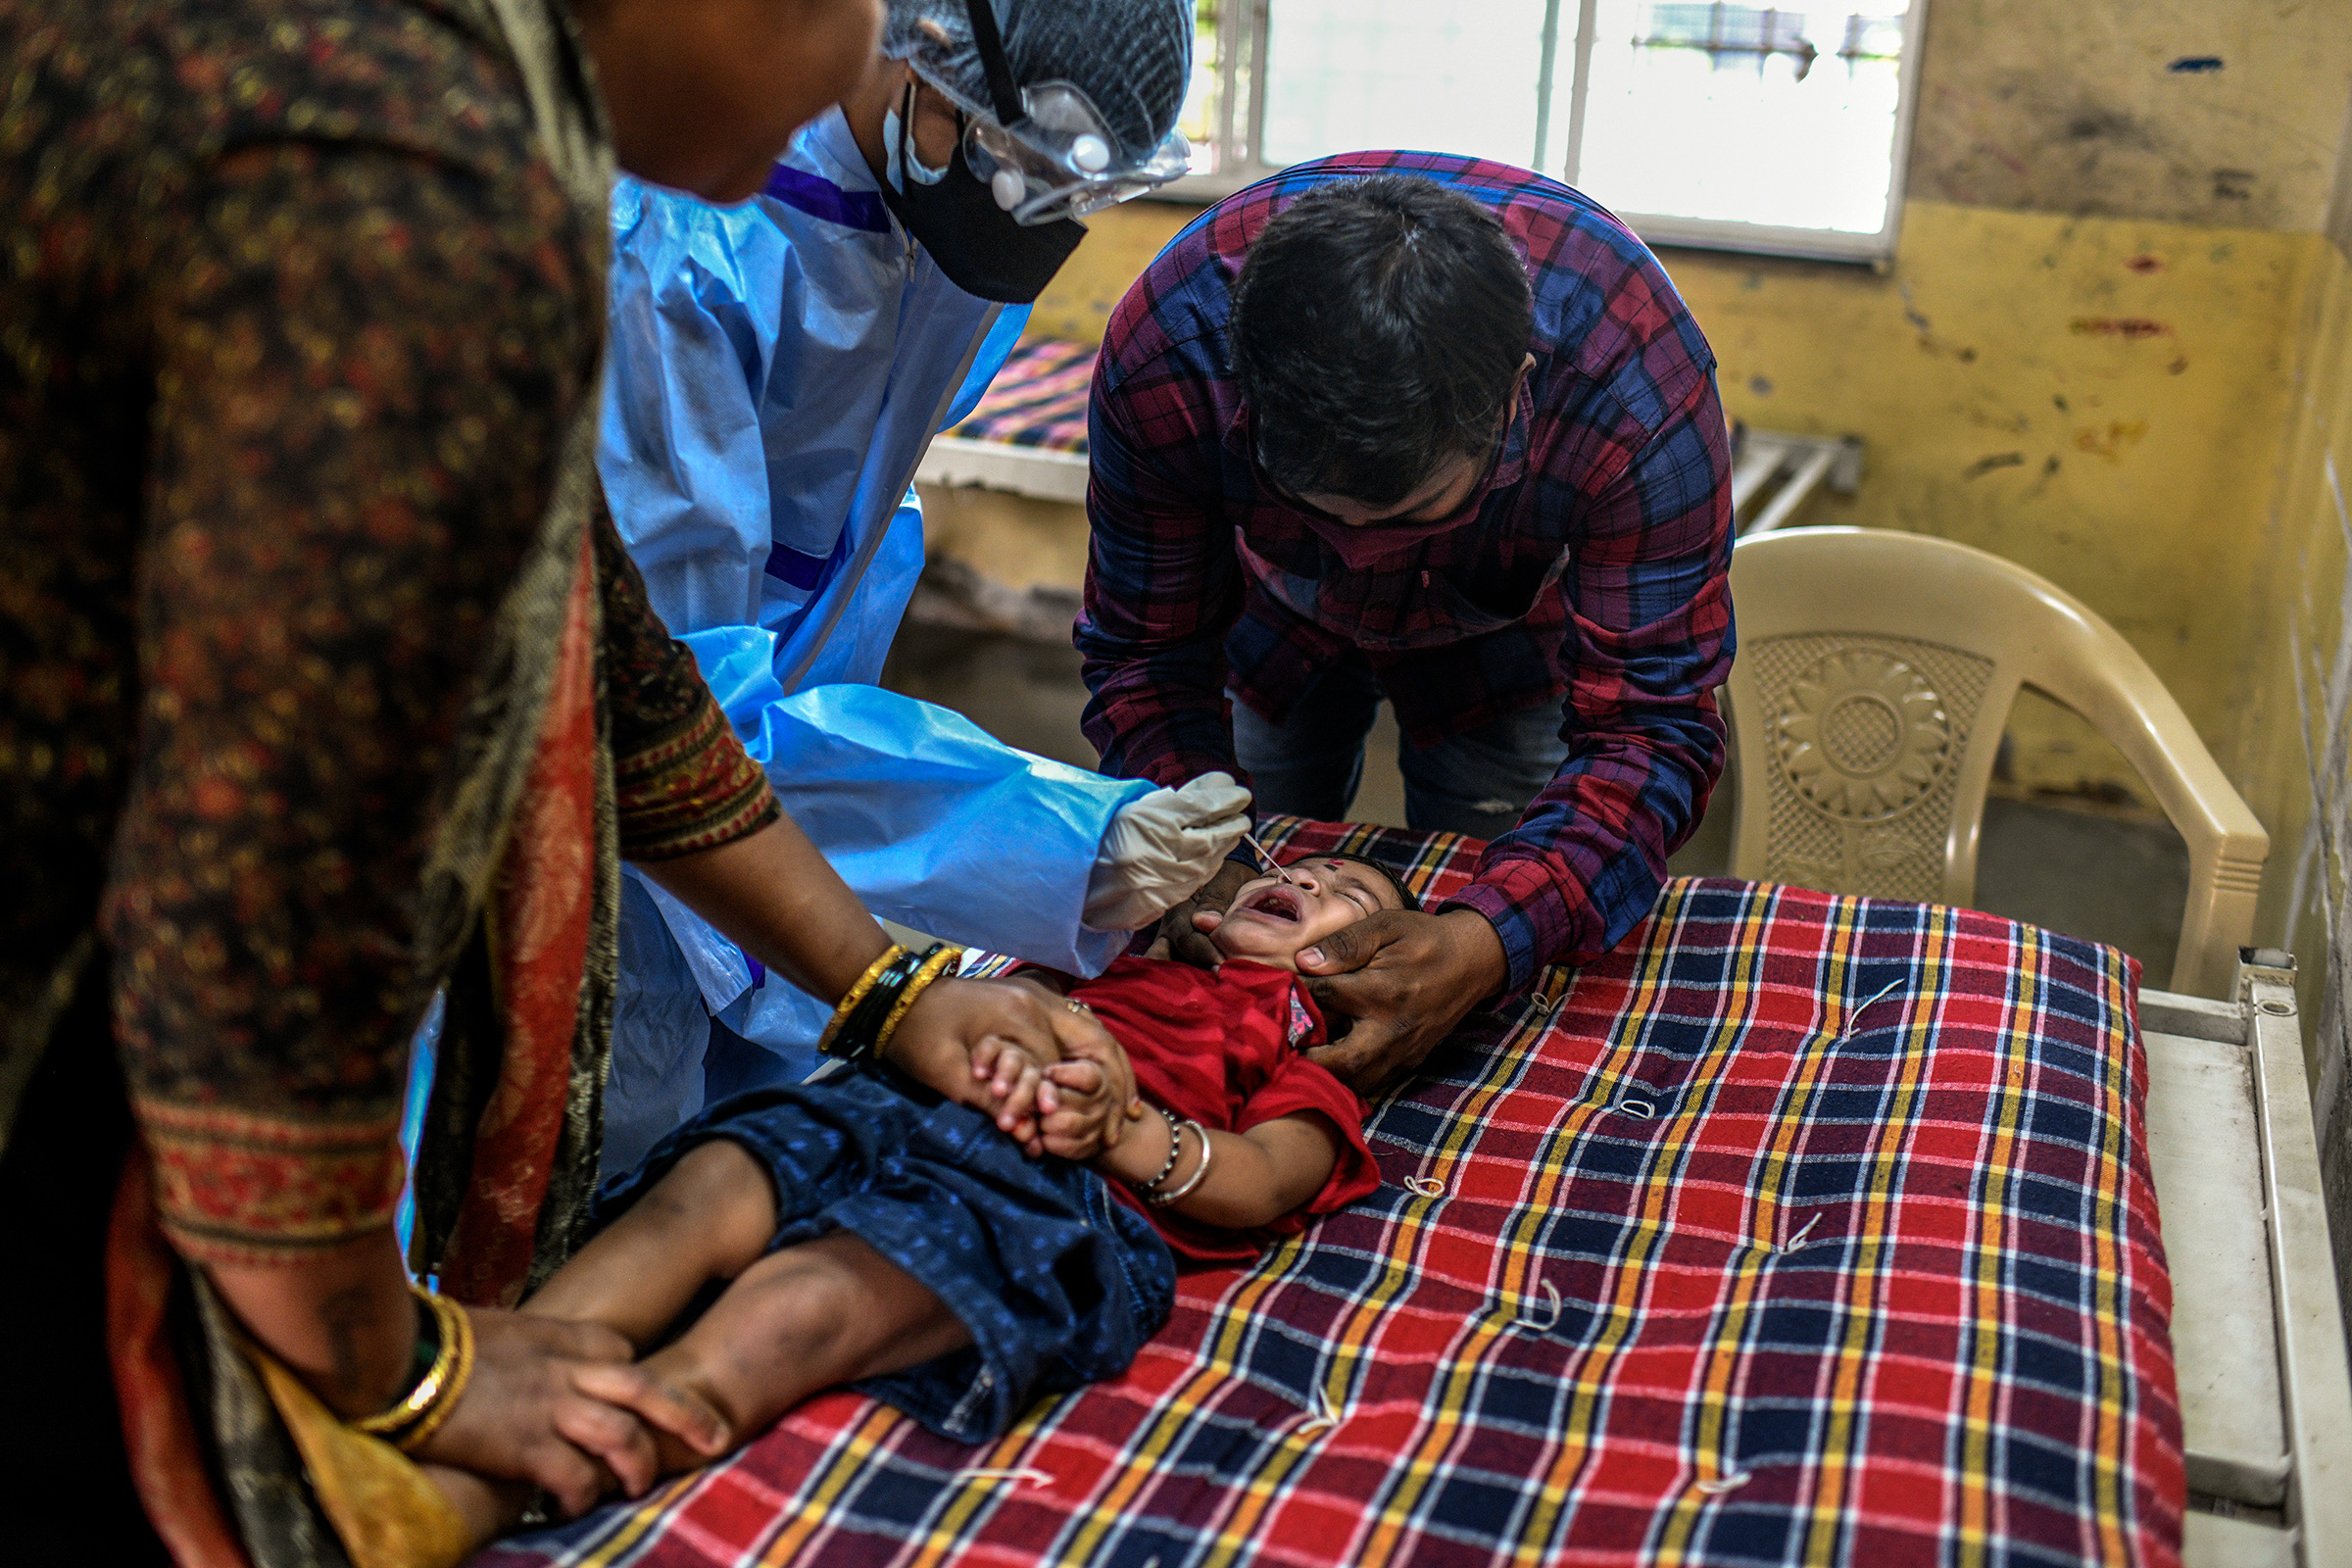 Parents keep their child still while a health care worker takes a nasal swab for a COVID-19 test at a school in Pune. (Atul Loke for TIME)